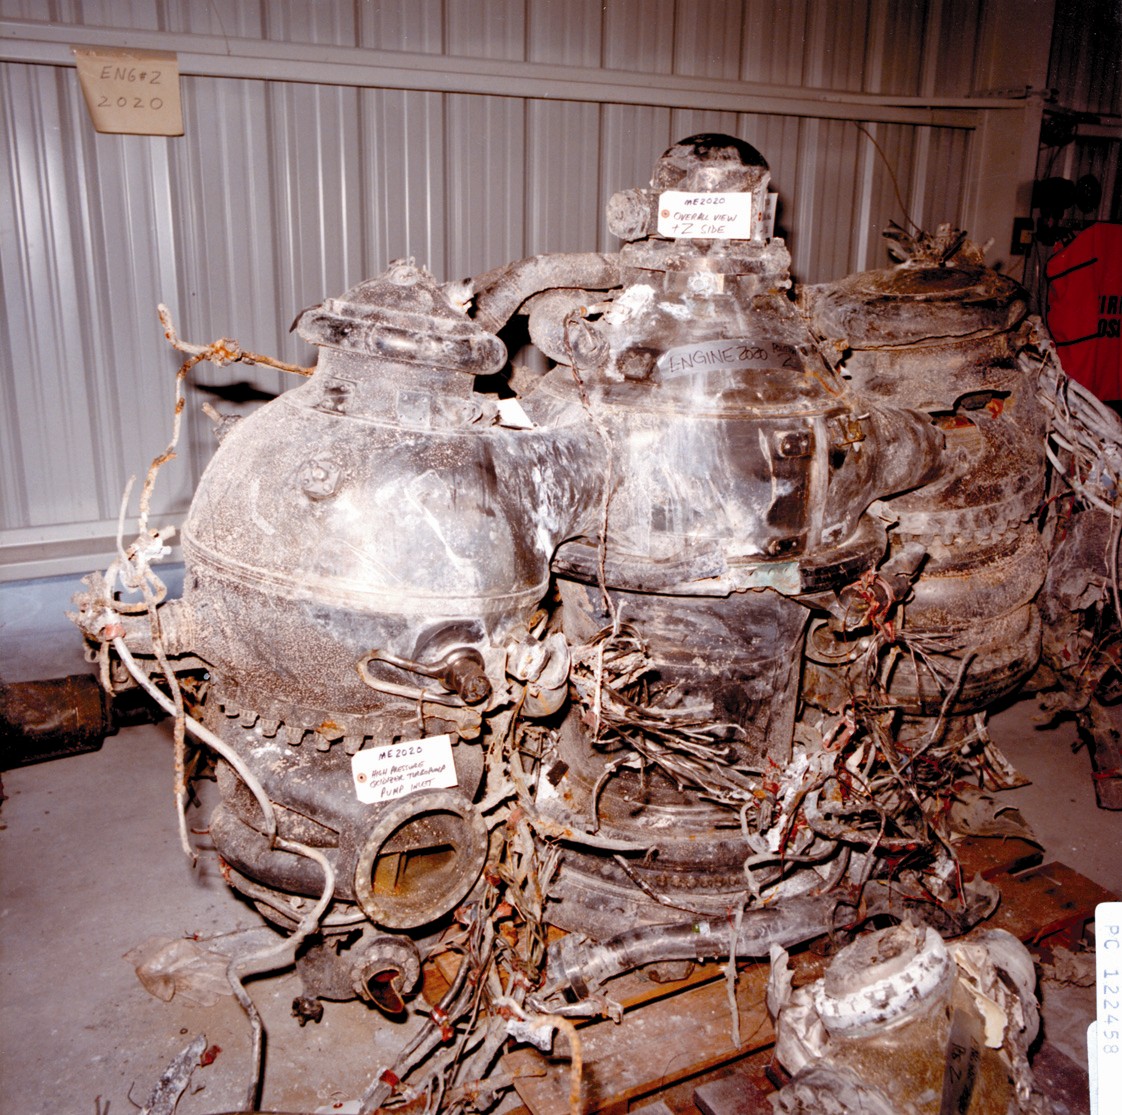 Challenger Explosion - Recovered Main Engines1122 x 1115